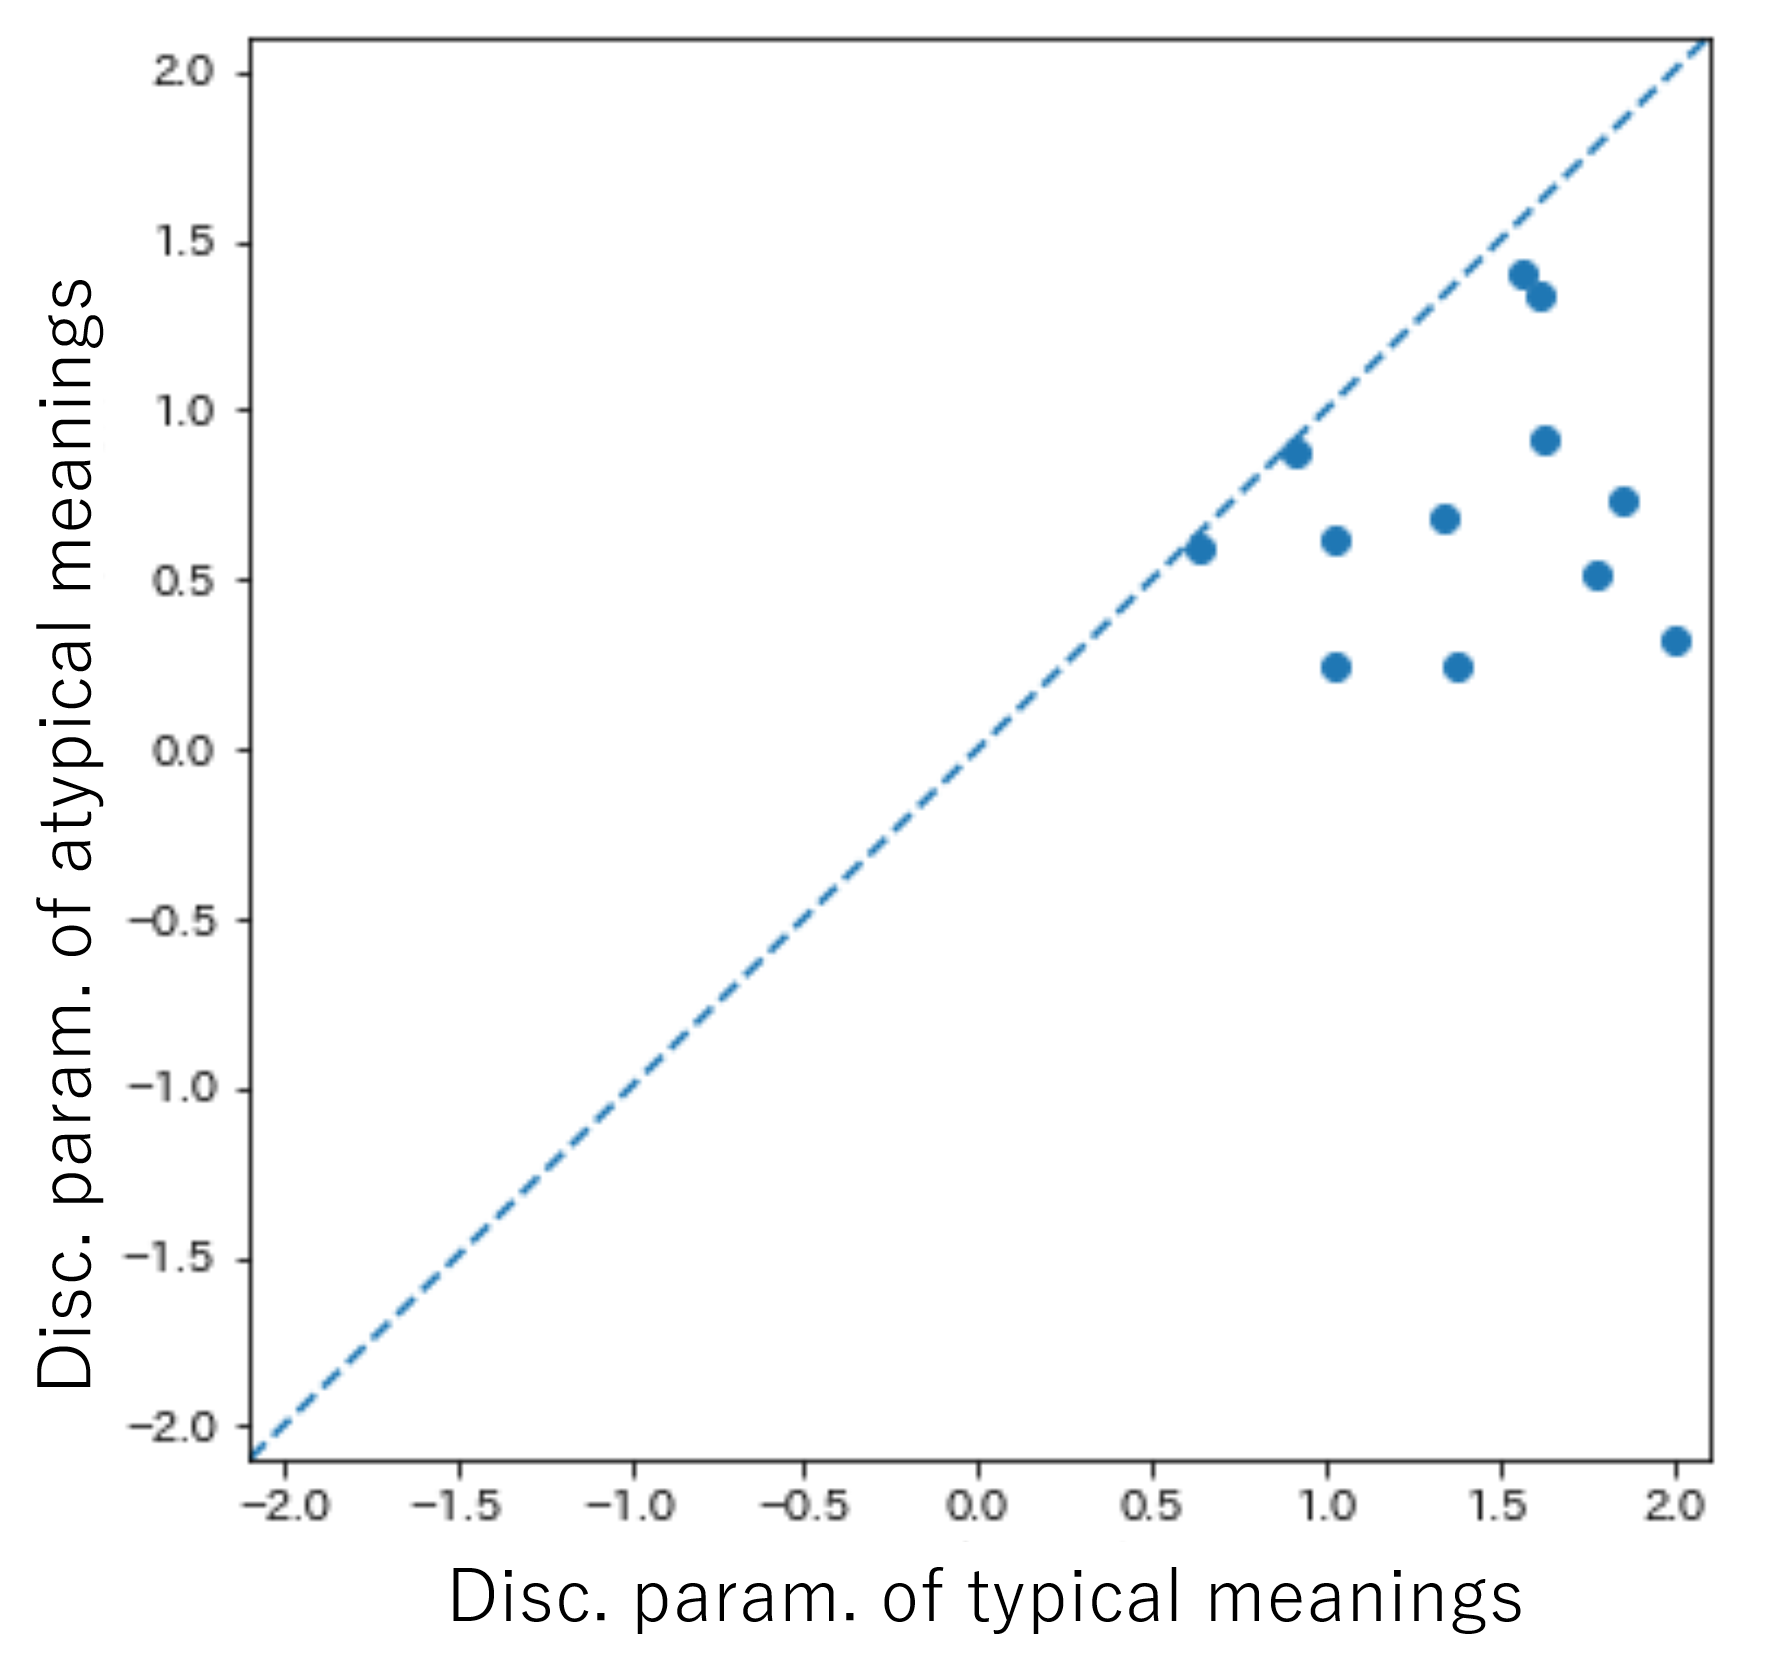 Scatter plot of discrimination parameter values of typical and atypical meanings